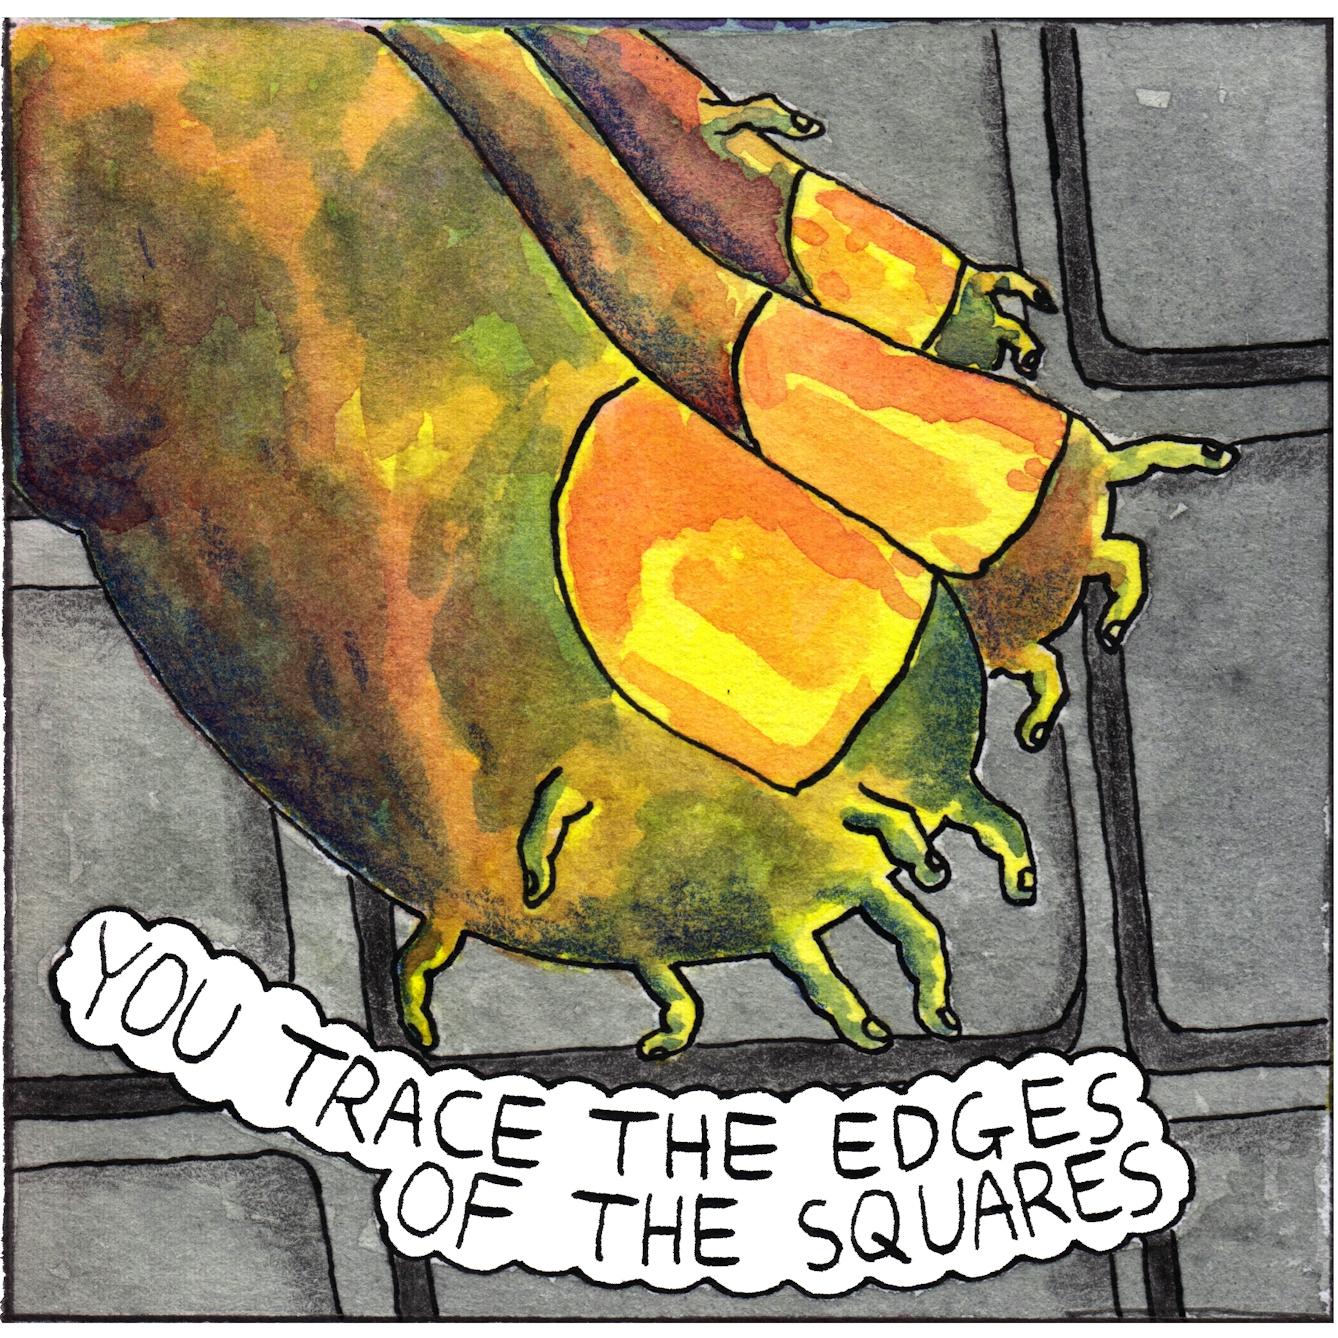 Panel three of the webcomic 'Doing emails' shows a close-up of three fingers poised over the keys of a keyboard. Tiny additional fingers, complete with fingernails, sprout from each of the three large fingers. The tiny fingers reach out like plant tendrils in different directions exploring the keyboard. The text bubble under the fingers says: "you trace the edges of the squares"